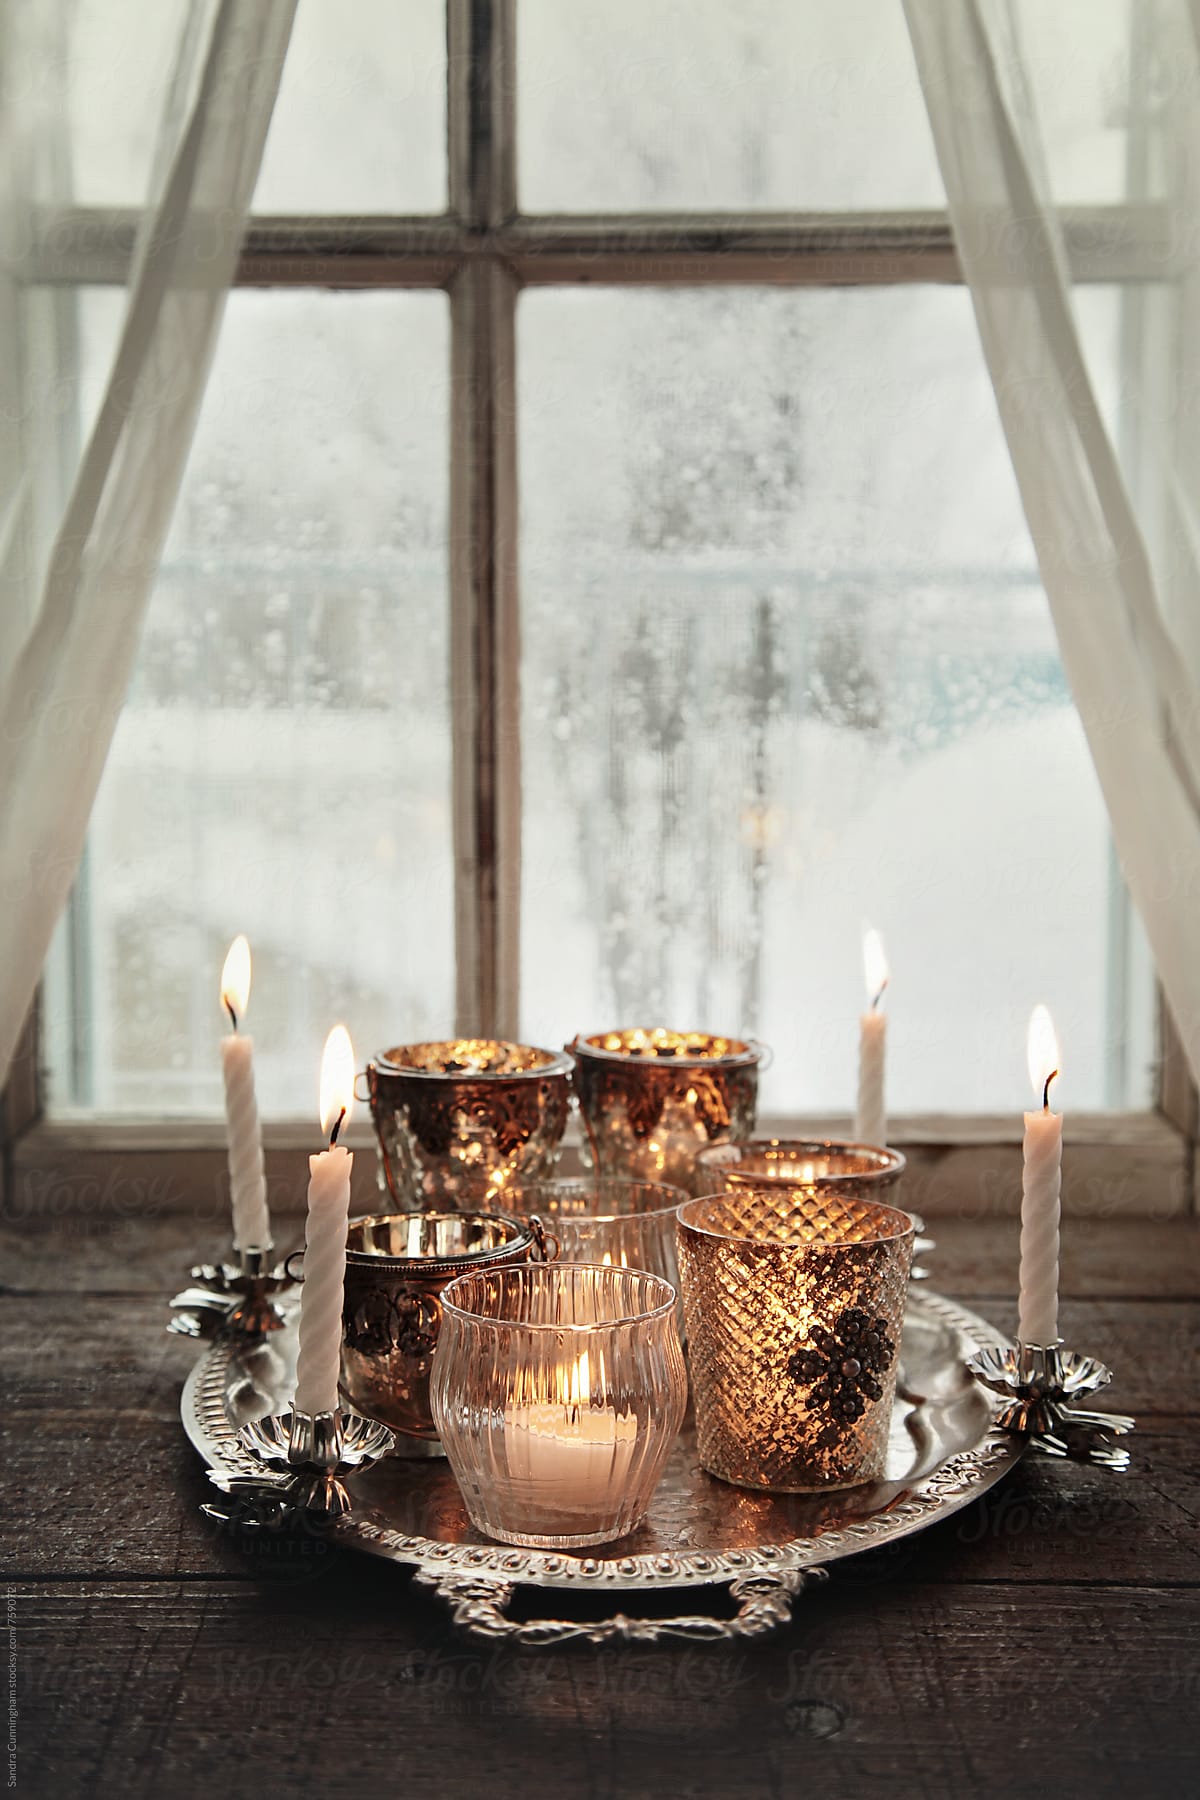 Votive candles on silver tray